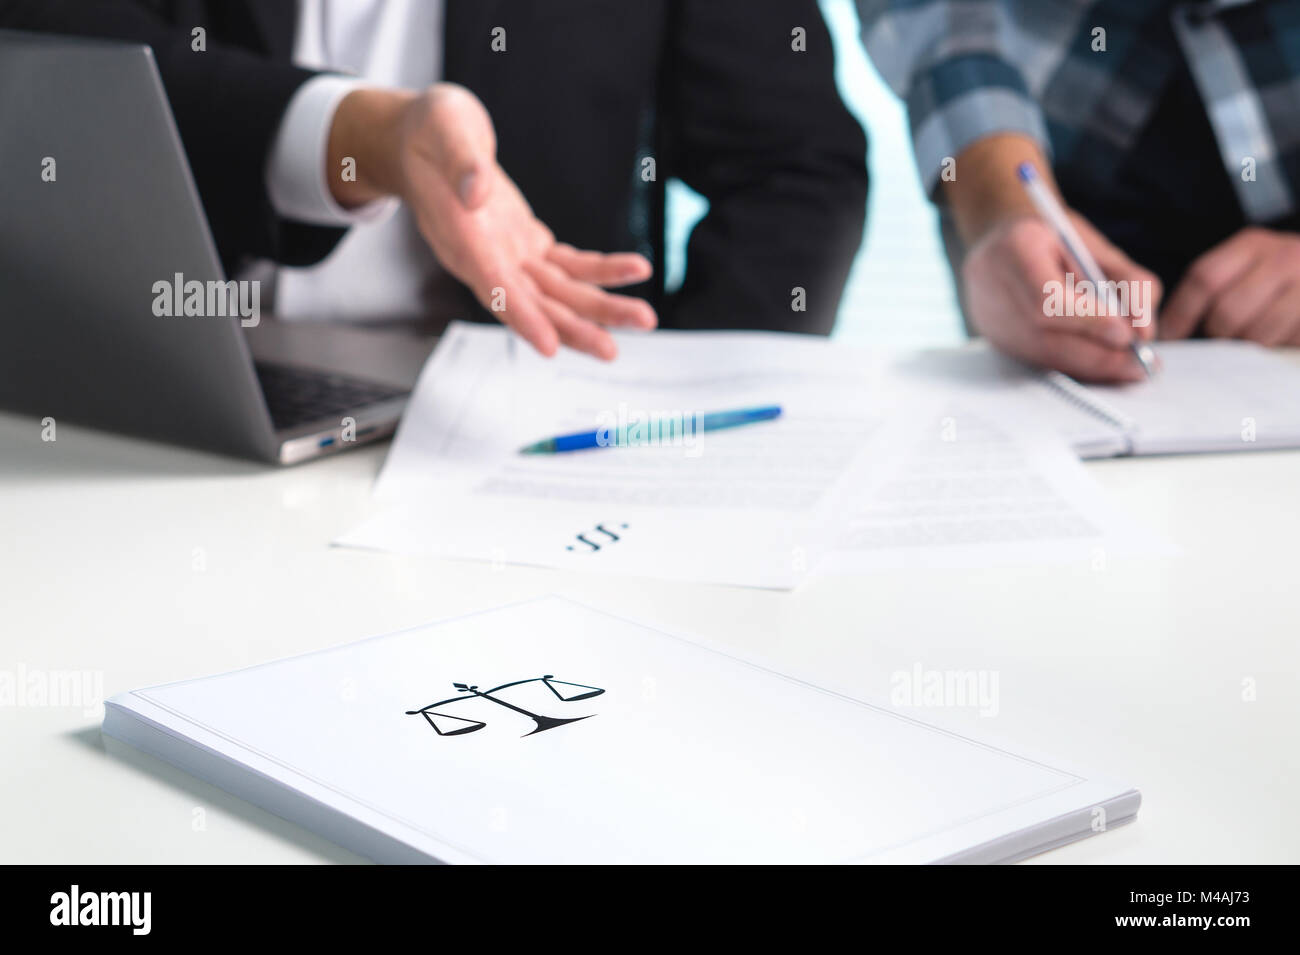 Team in law firm working in office. Lawyers discussing and writing. Business people having legal meeting. Pile of paper on table with scale. Stock Photo